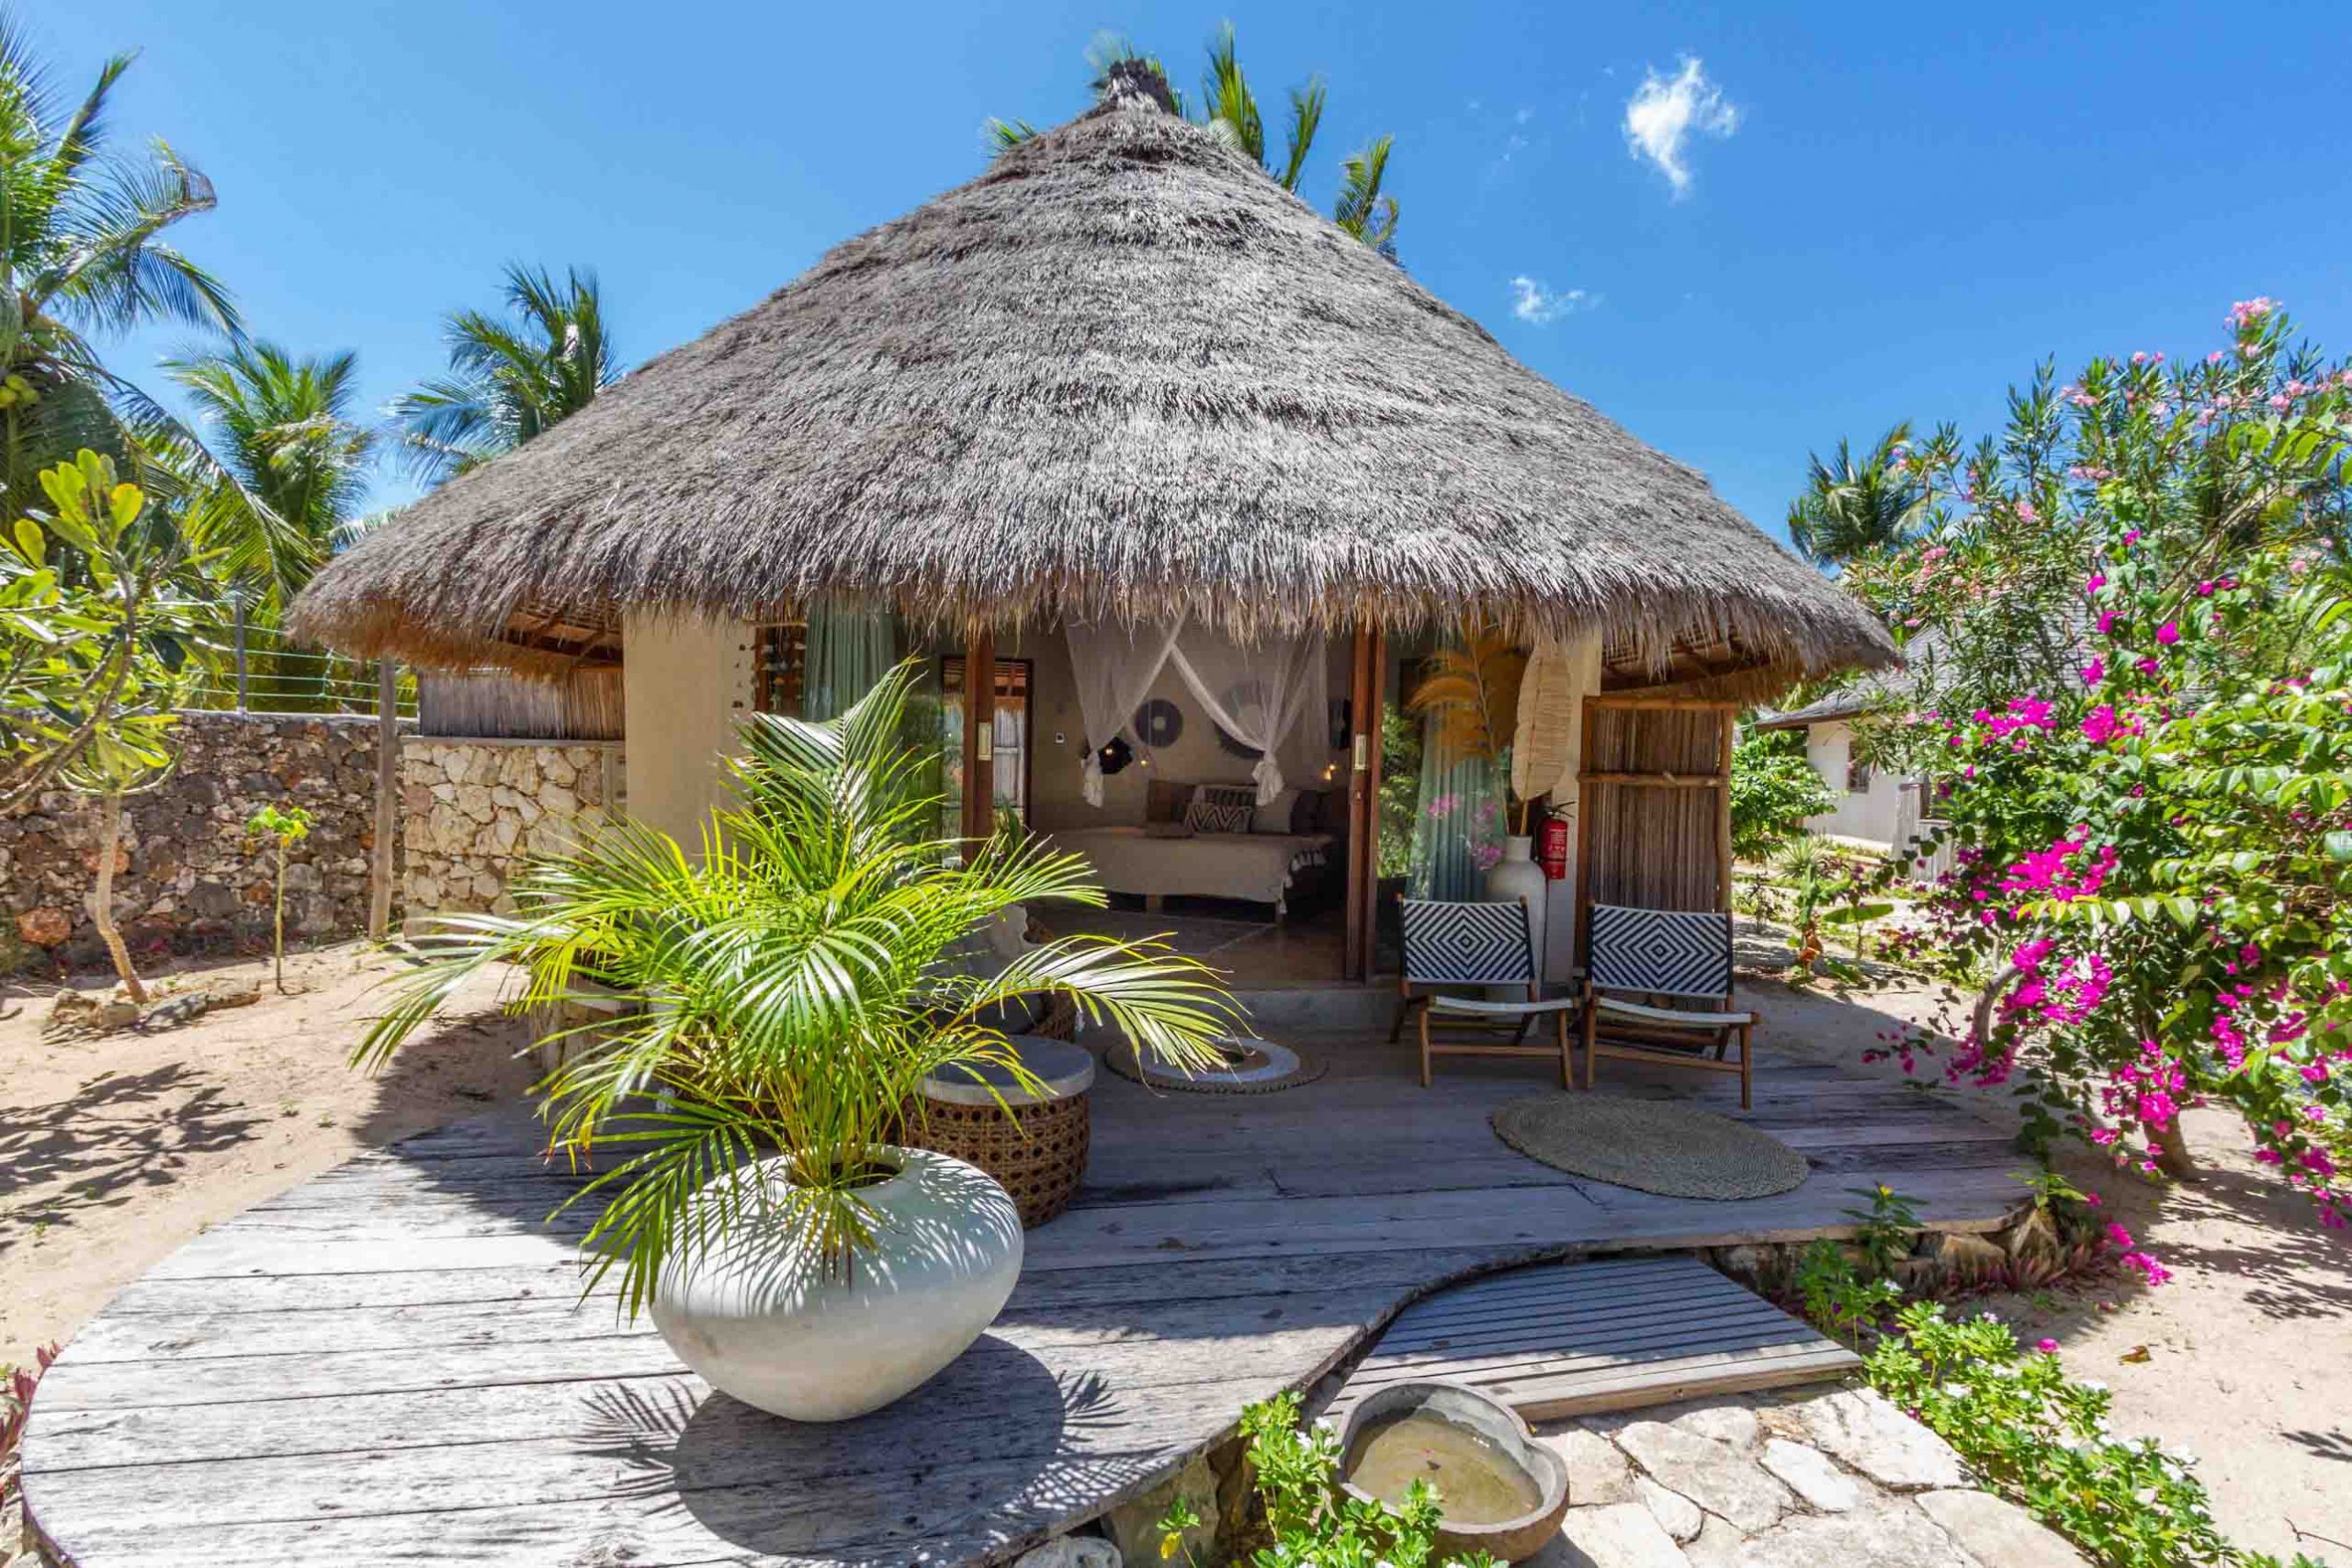 Oceanview Bungalows is combination with traditional palm thatched